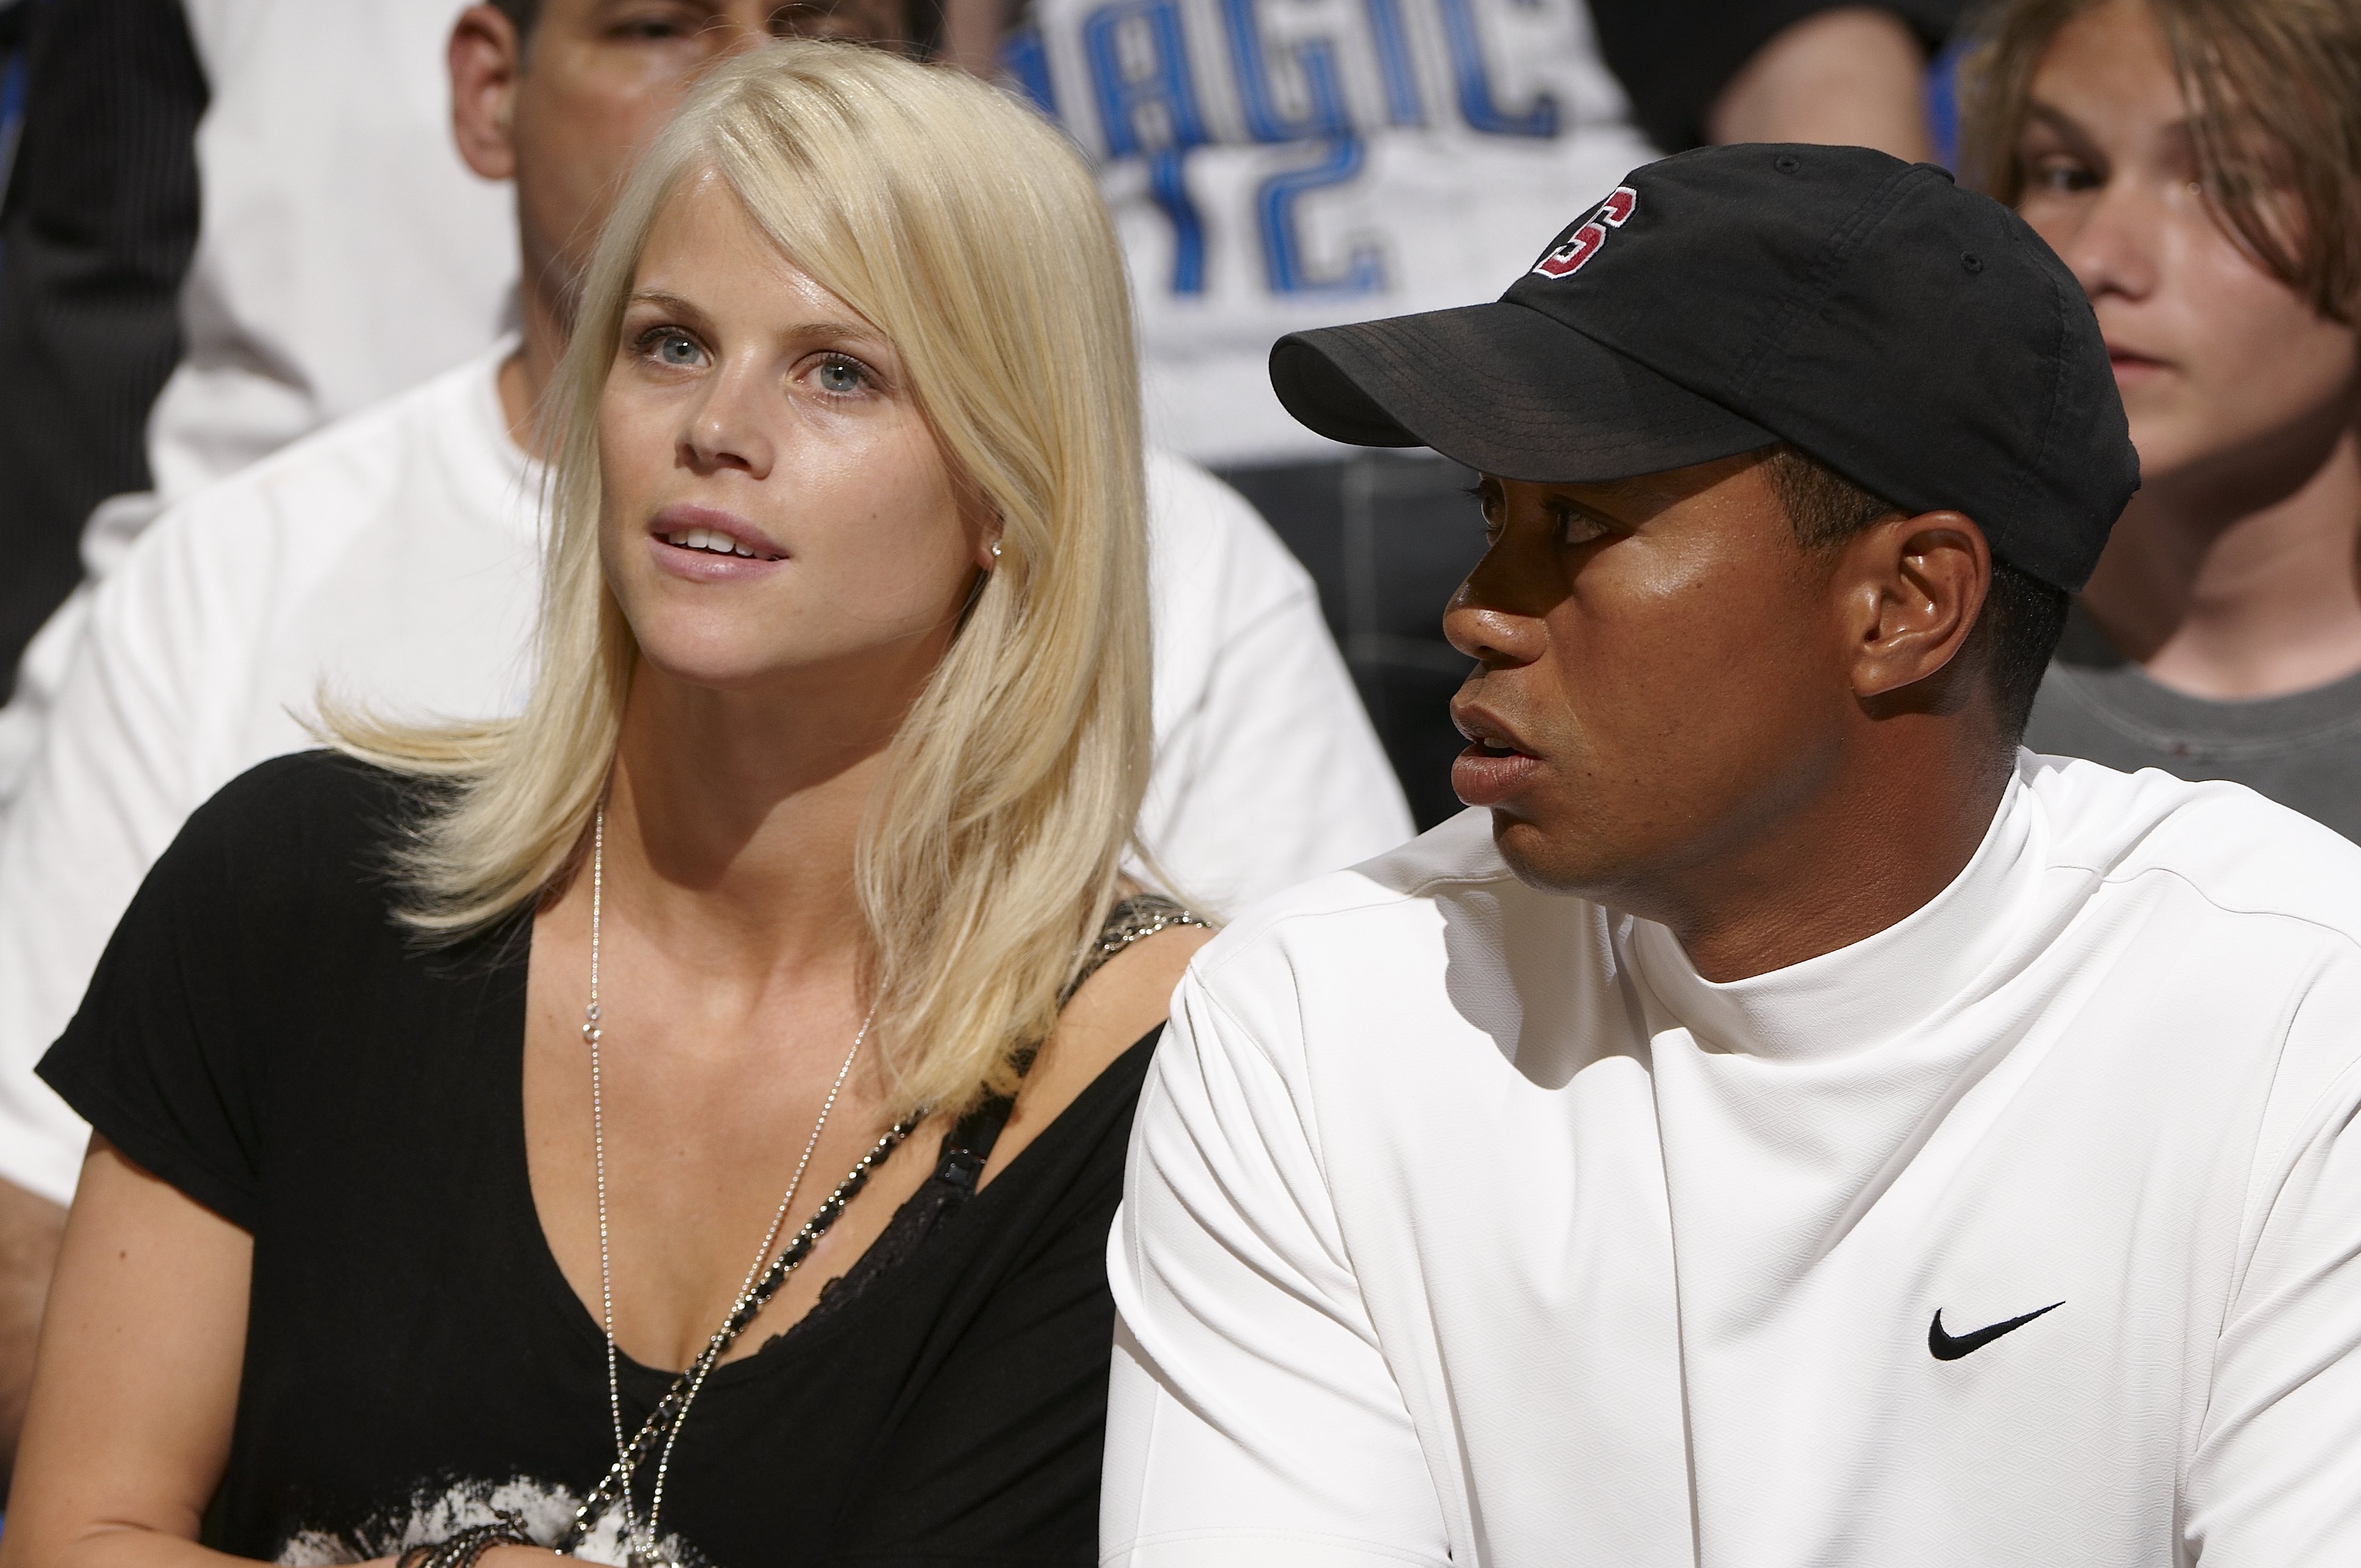 Elin Nordegren and Tiger Woods at the Orlando Magic vs. Los Angeles Lakers game in Orlando, Florida, on June 11, 2009. | Source: Getty Images